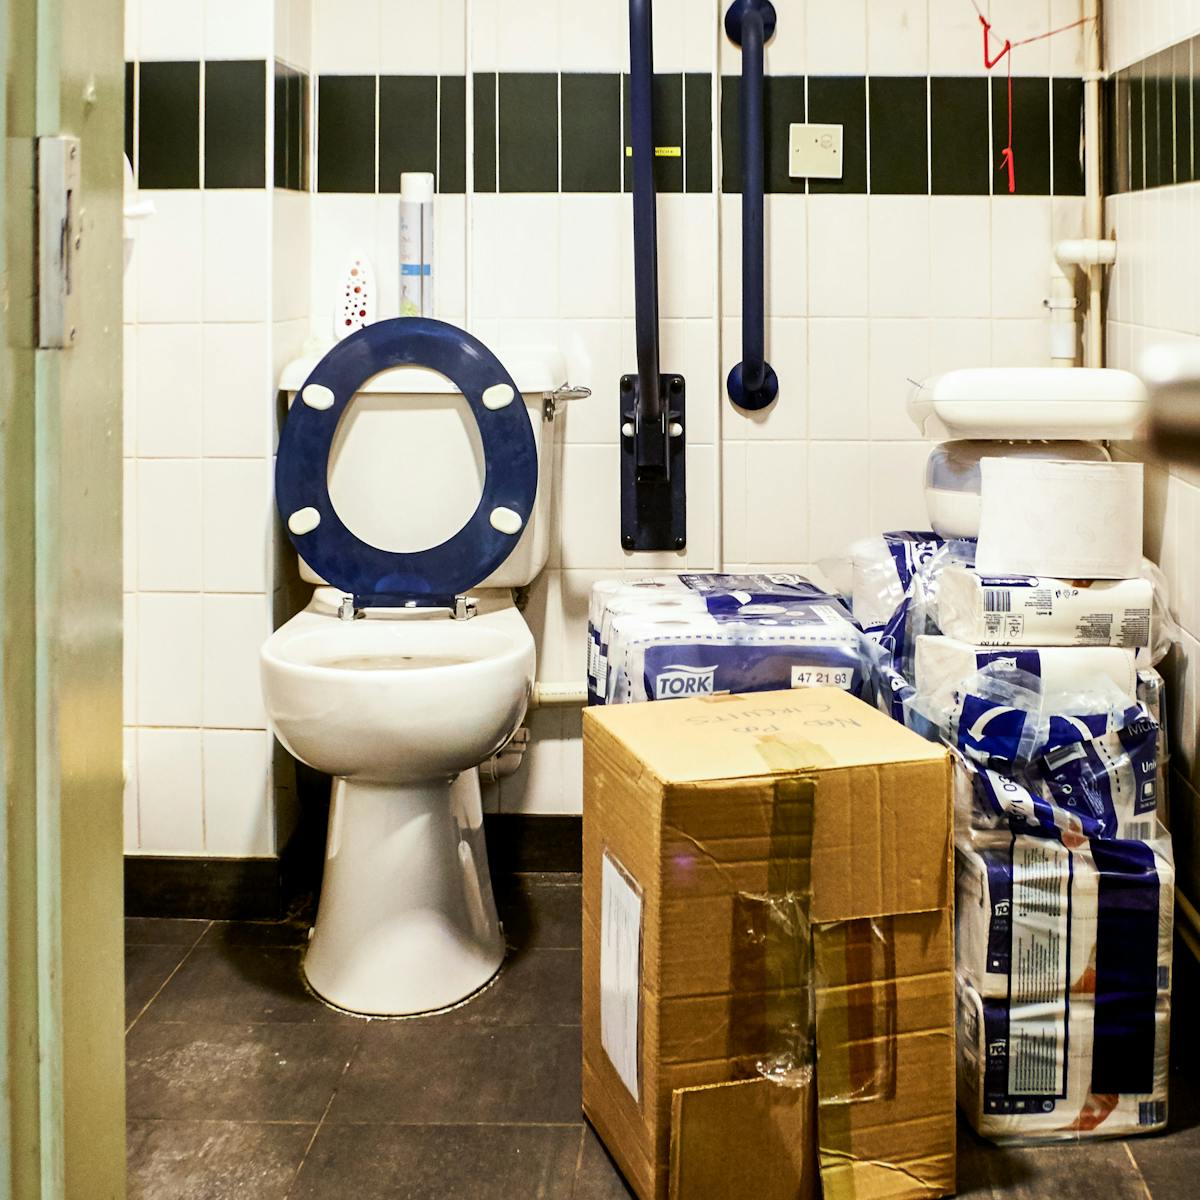 Photograph though a doorway into an accessible toilet. The floorspace next to the toilet is covered with a cardboard box and piles of packets of toilet paper.